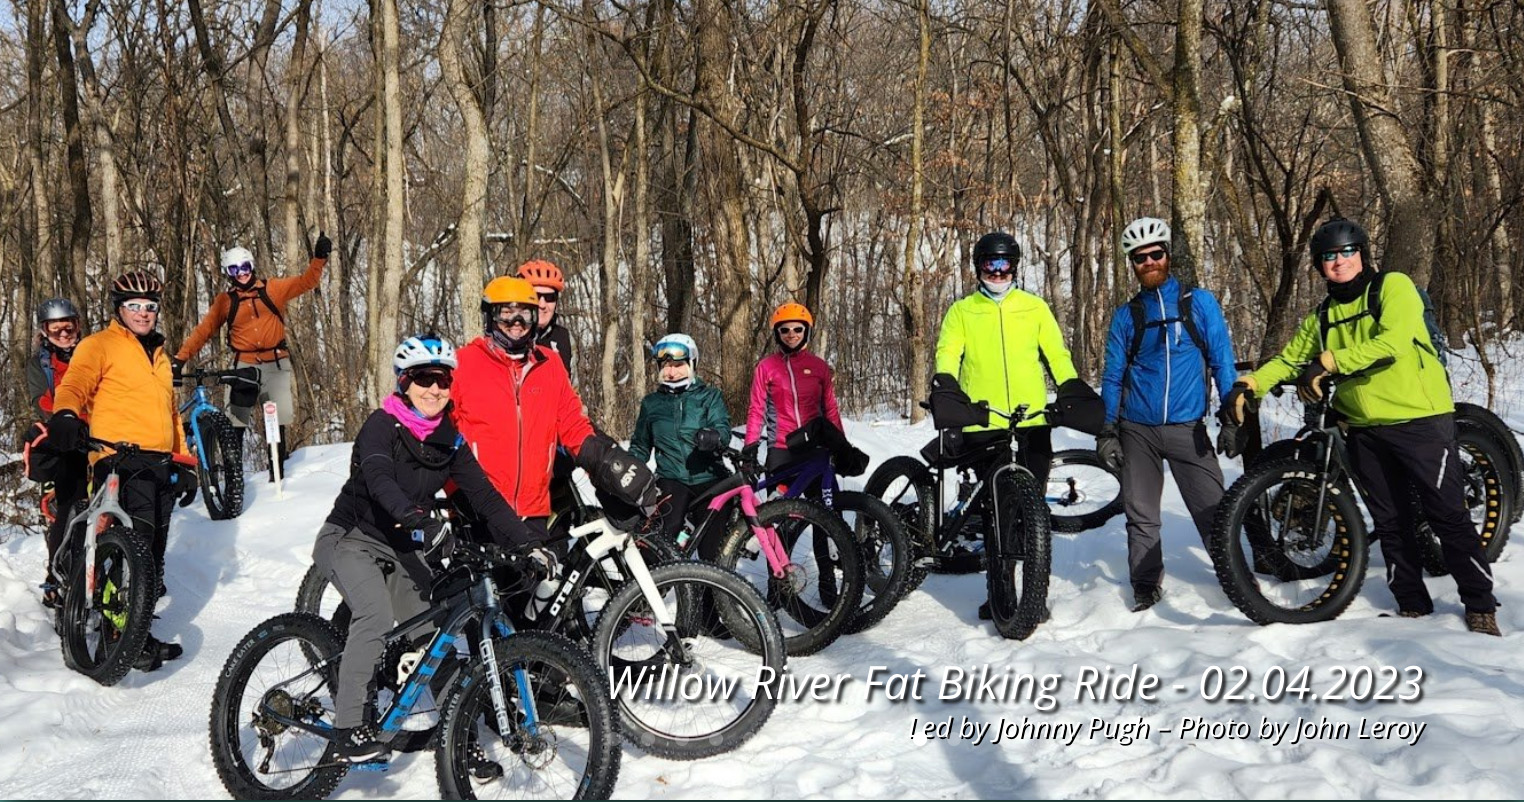 Group of 10 people posing with their bicycles in the snow